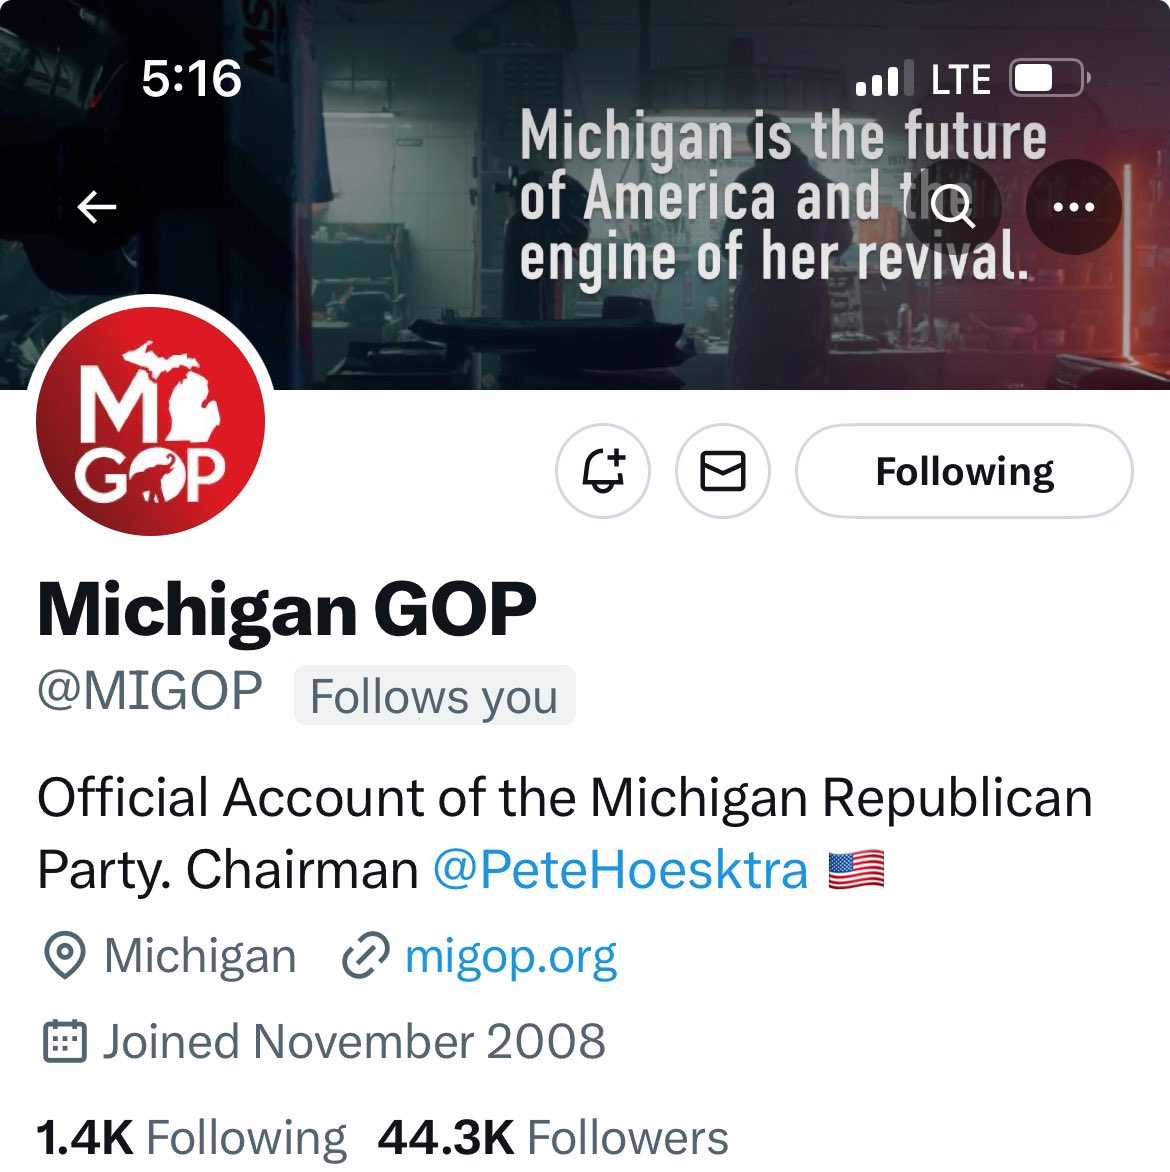 The Michigan Republican Party official Twitter account is now under the control of Chair Pete Hoekstra. In other news, the account has unblocked me.